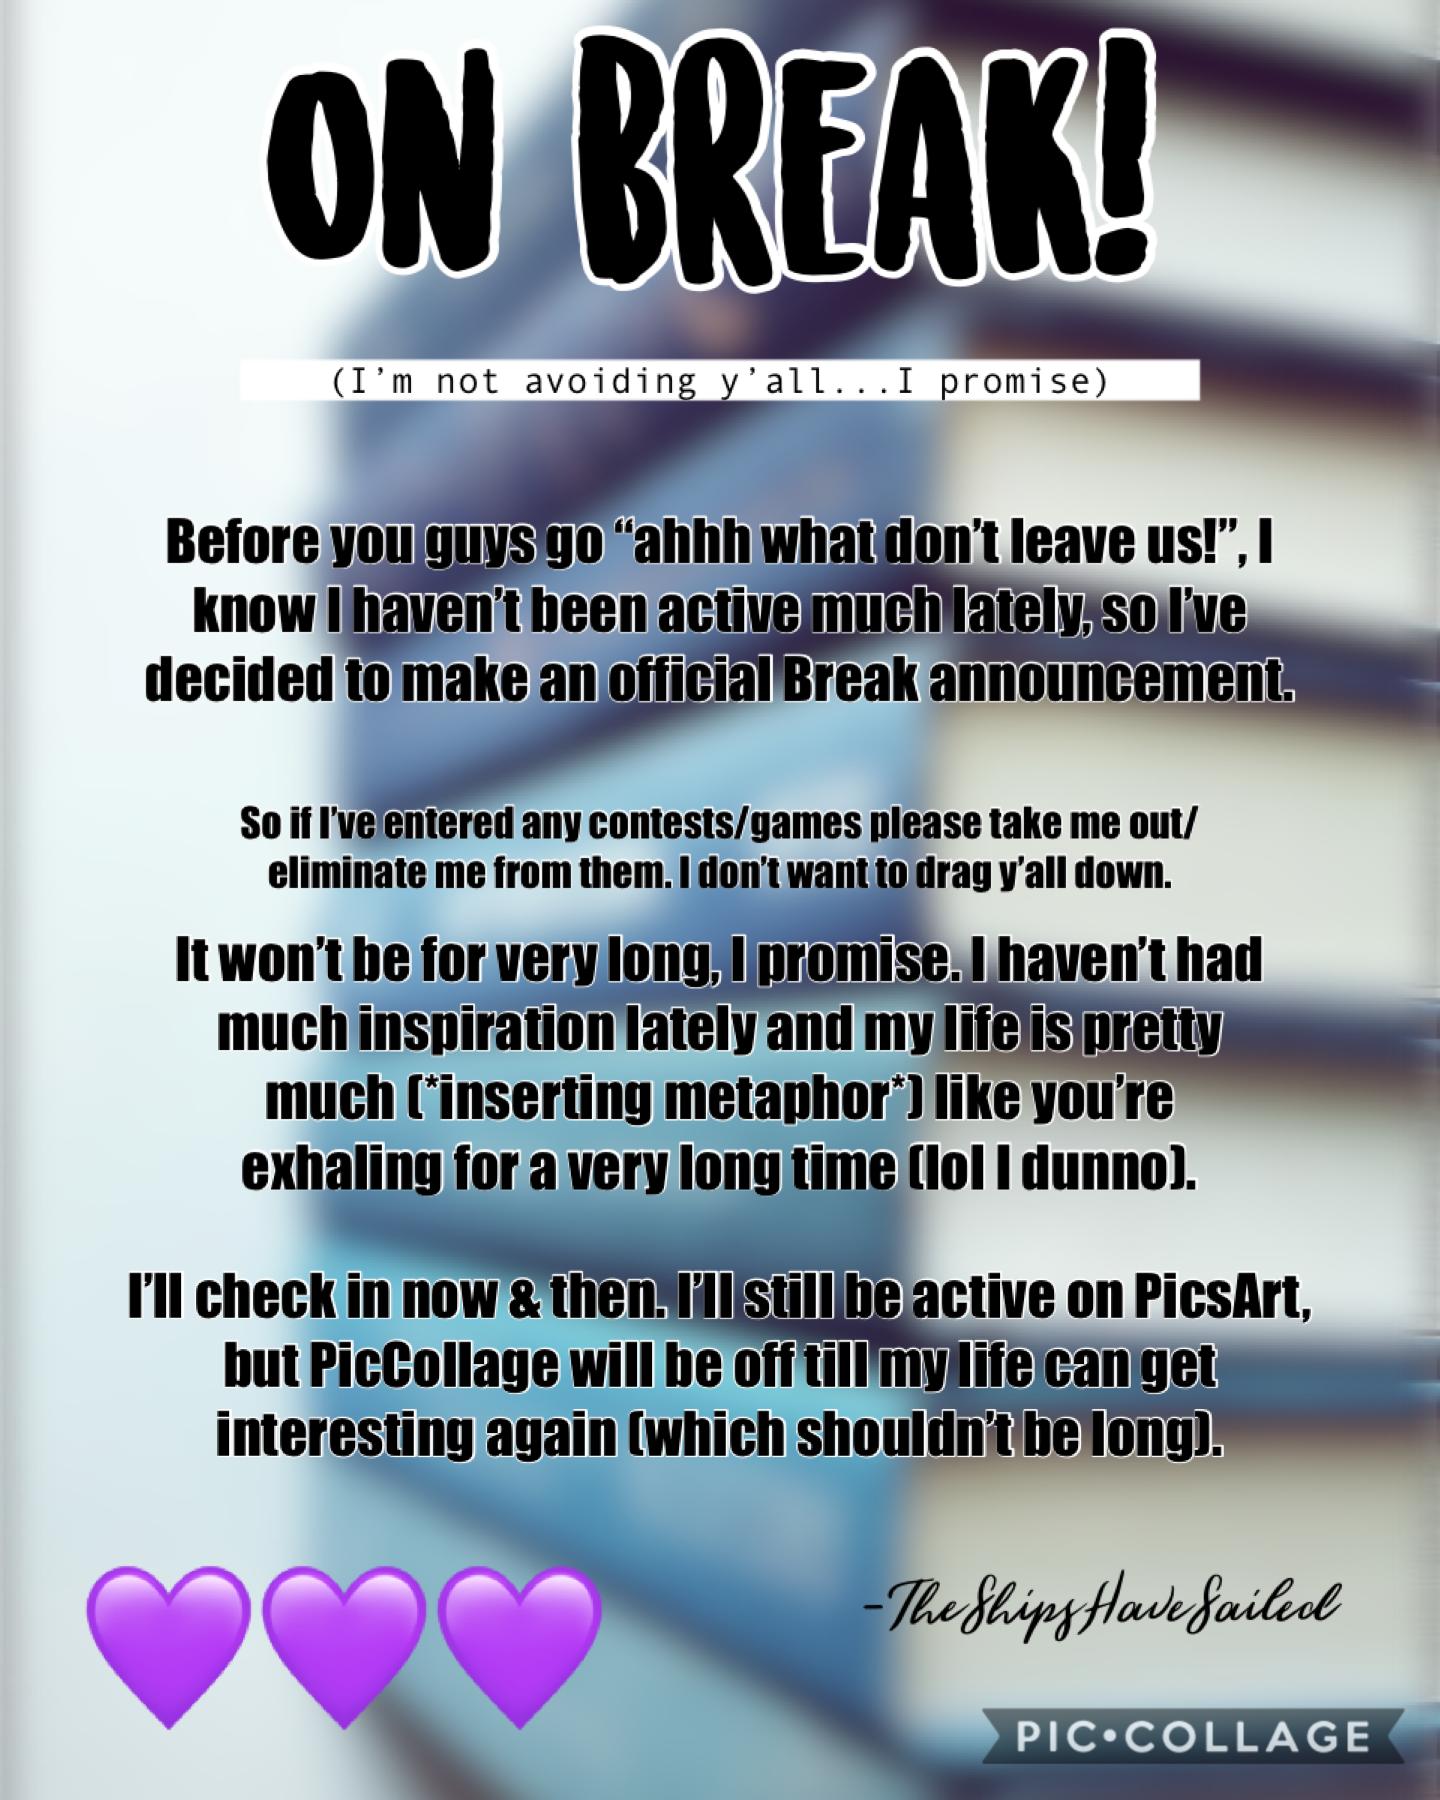 Please understand!! I love y’all so much! Take me out if any games I’m in, and I’m pausing all collabs for now.

Bye! 😘💜